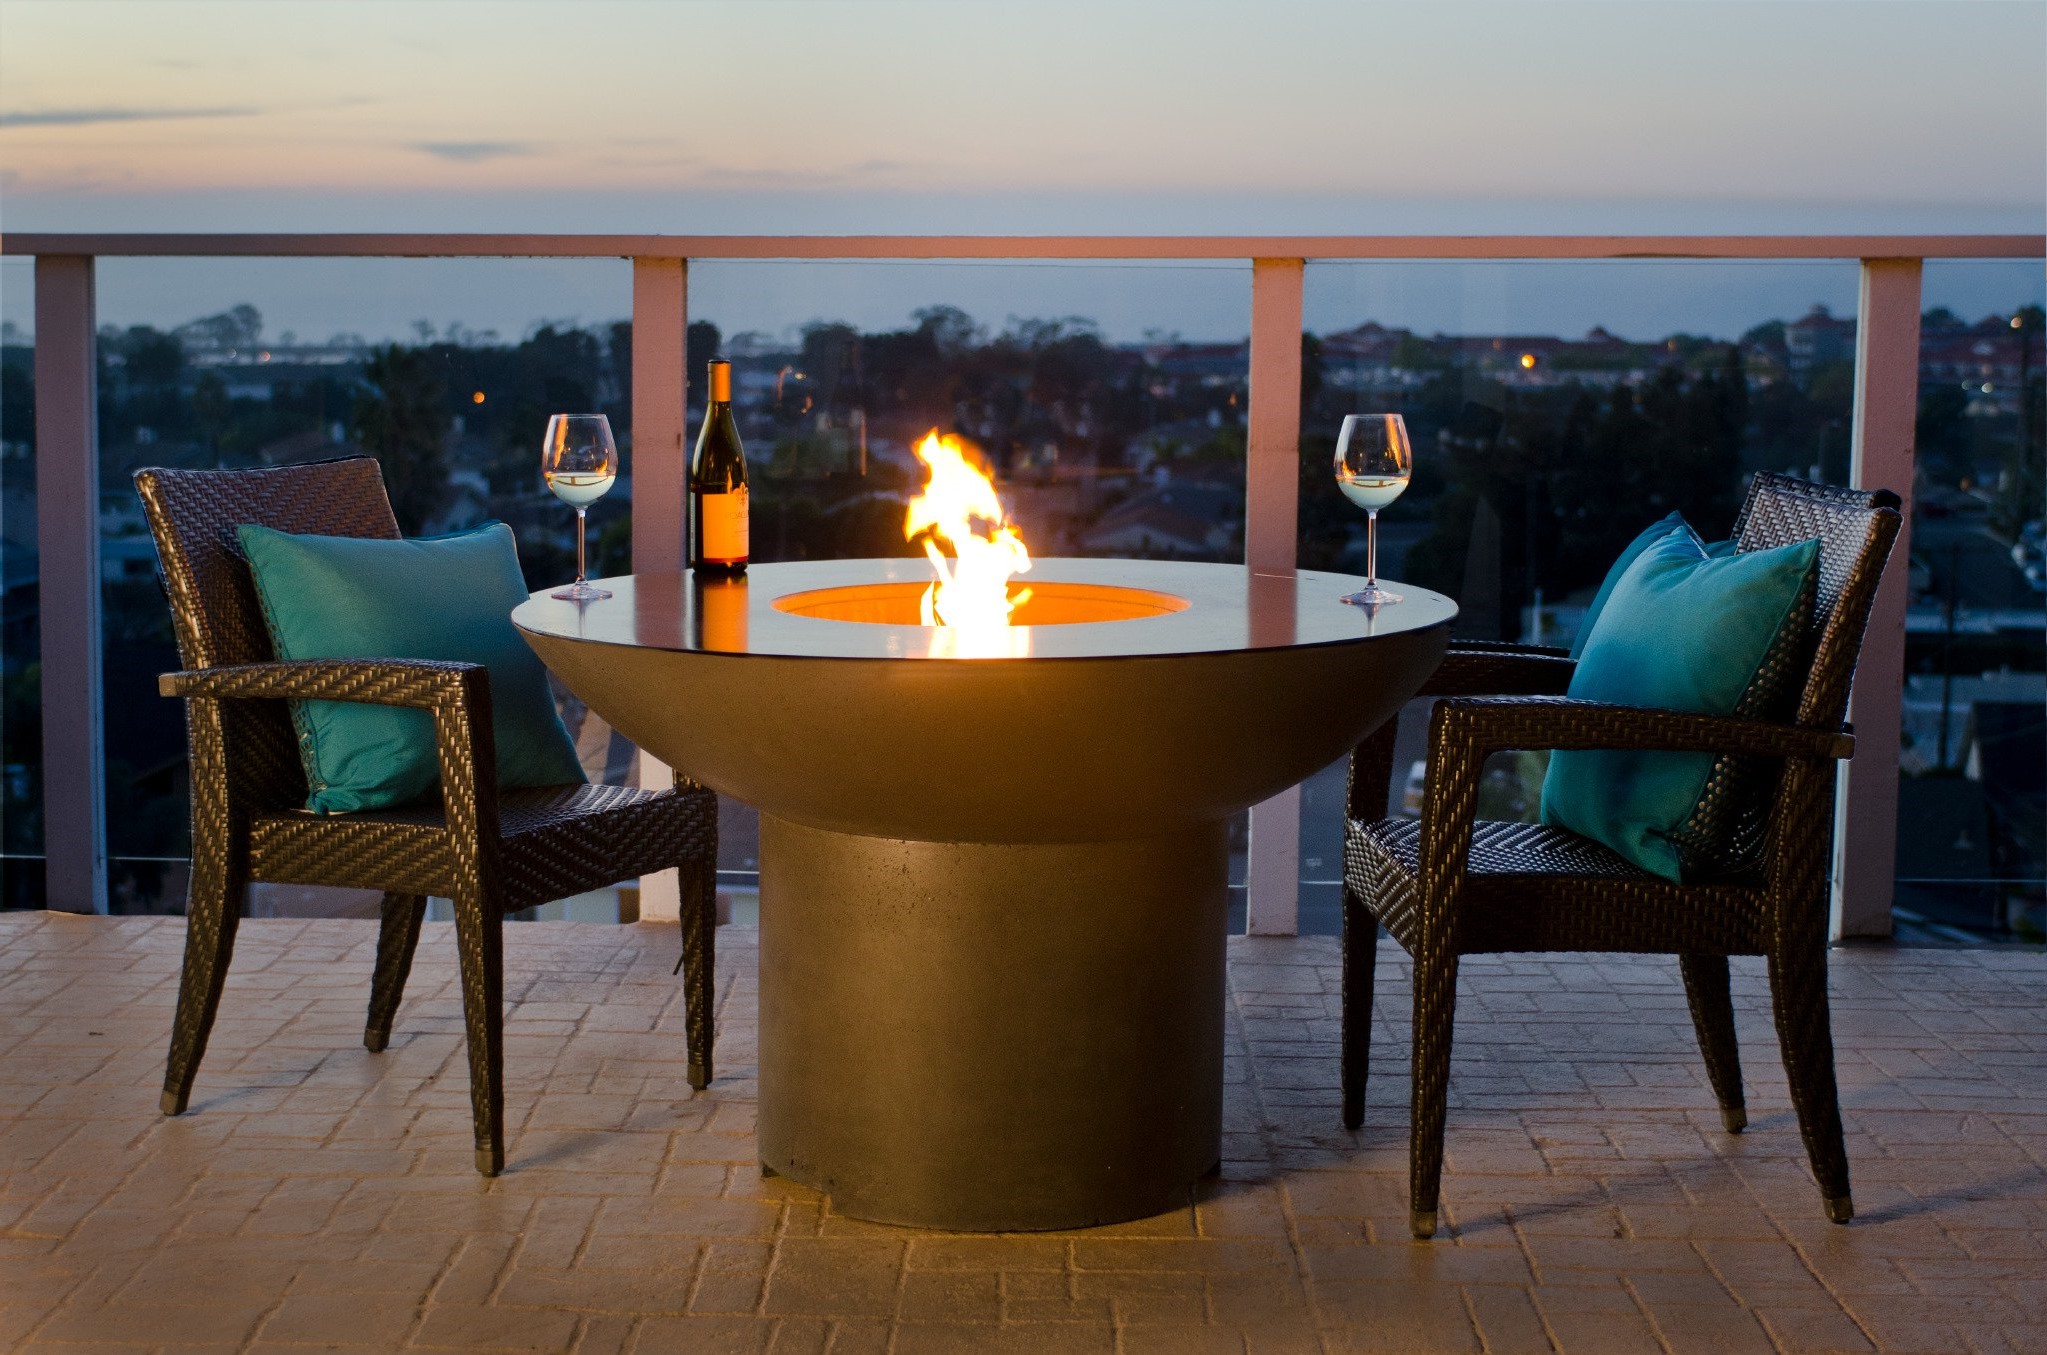 Lotus Dining Fire Table by American Fyre Design made of GFRC